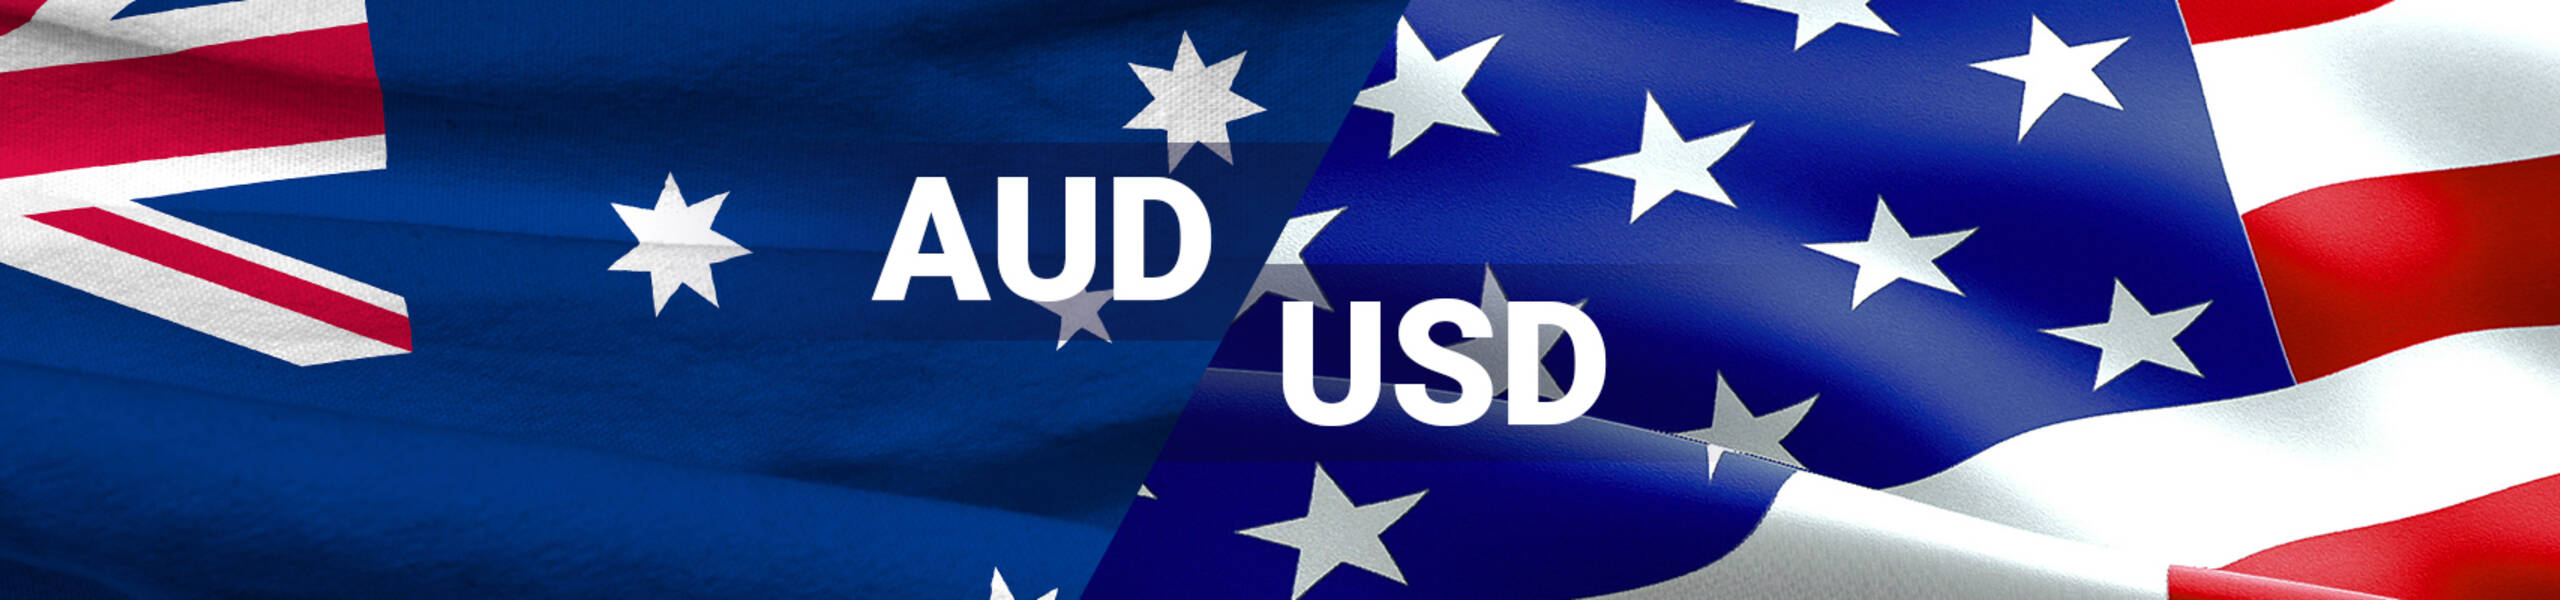 AUD/USD: aussie made new lows